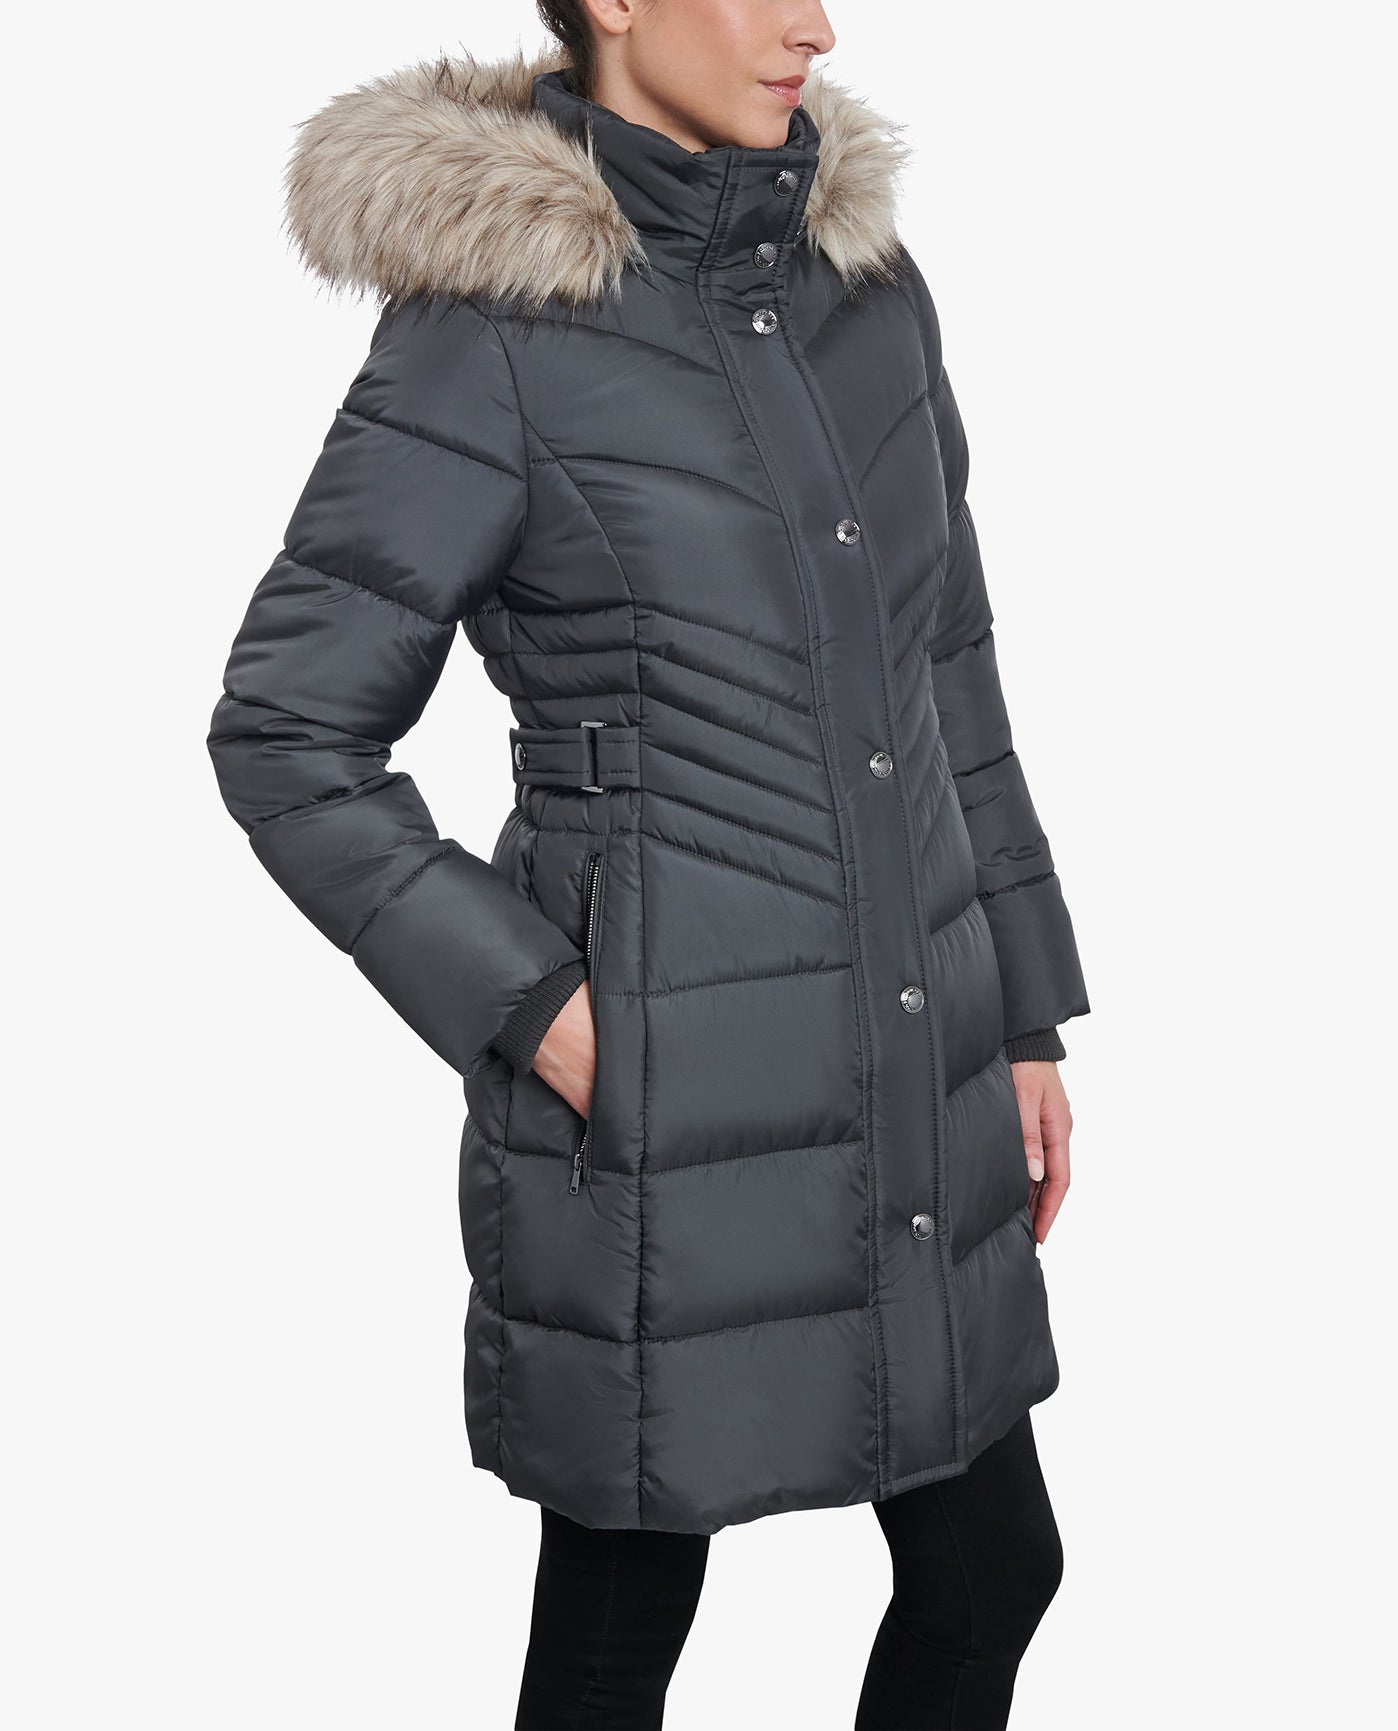 SIDE VIEW OF PLUS SIZE ZIP-FRONT LONG LENGTH PUFFER JACKET WITH ZIP-OFF FUR TRIM HOOD | GUNMETAL